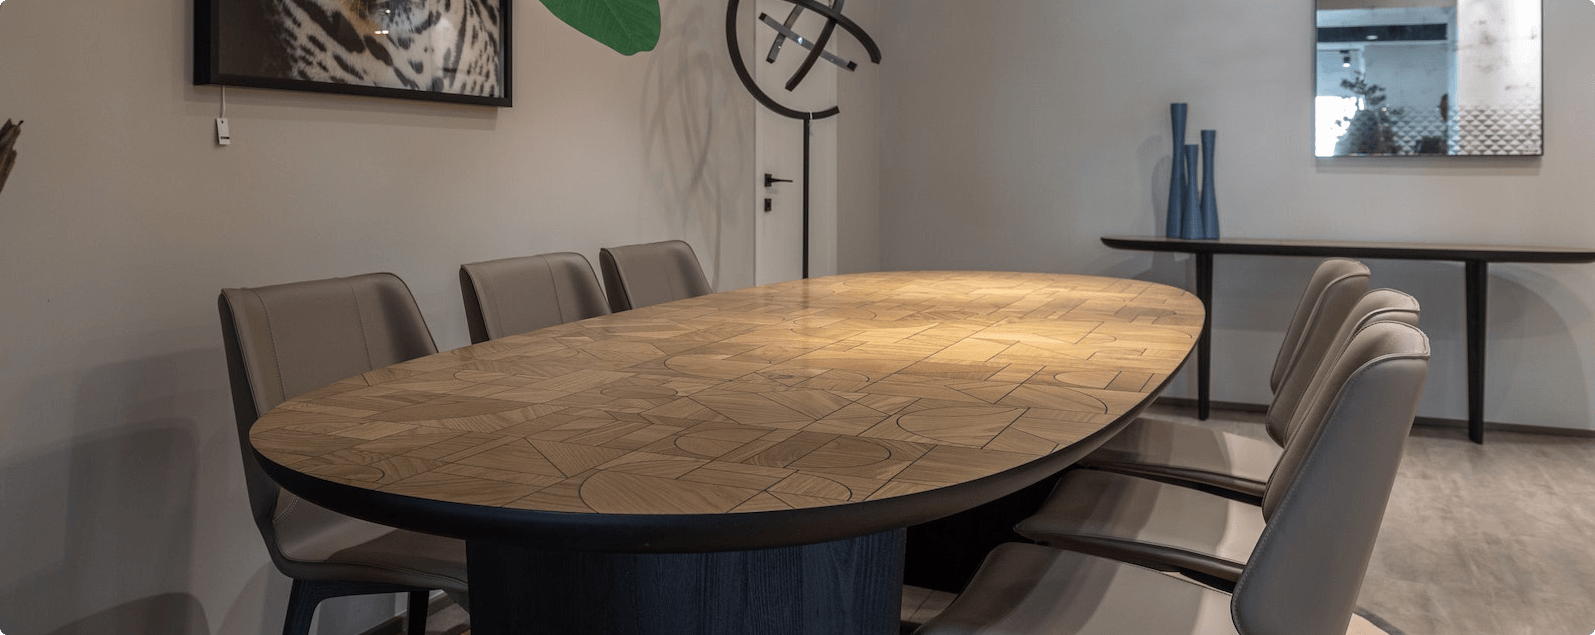 office round table